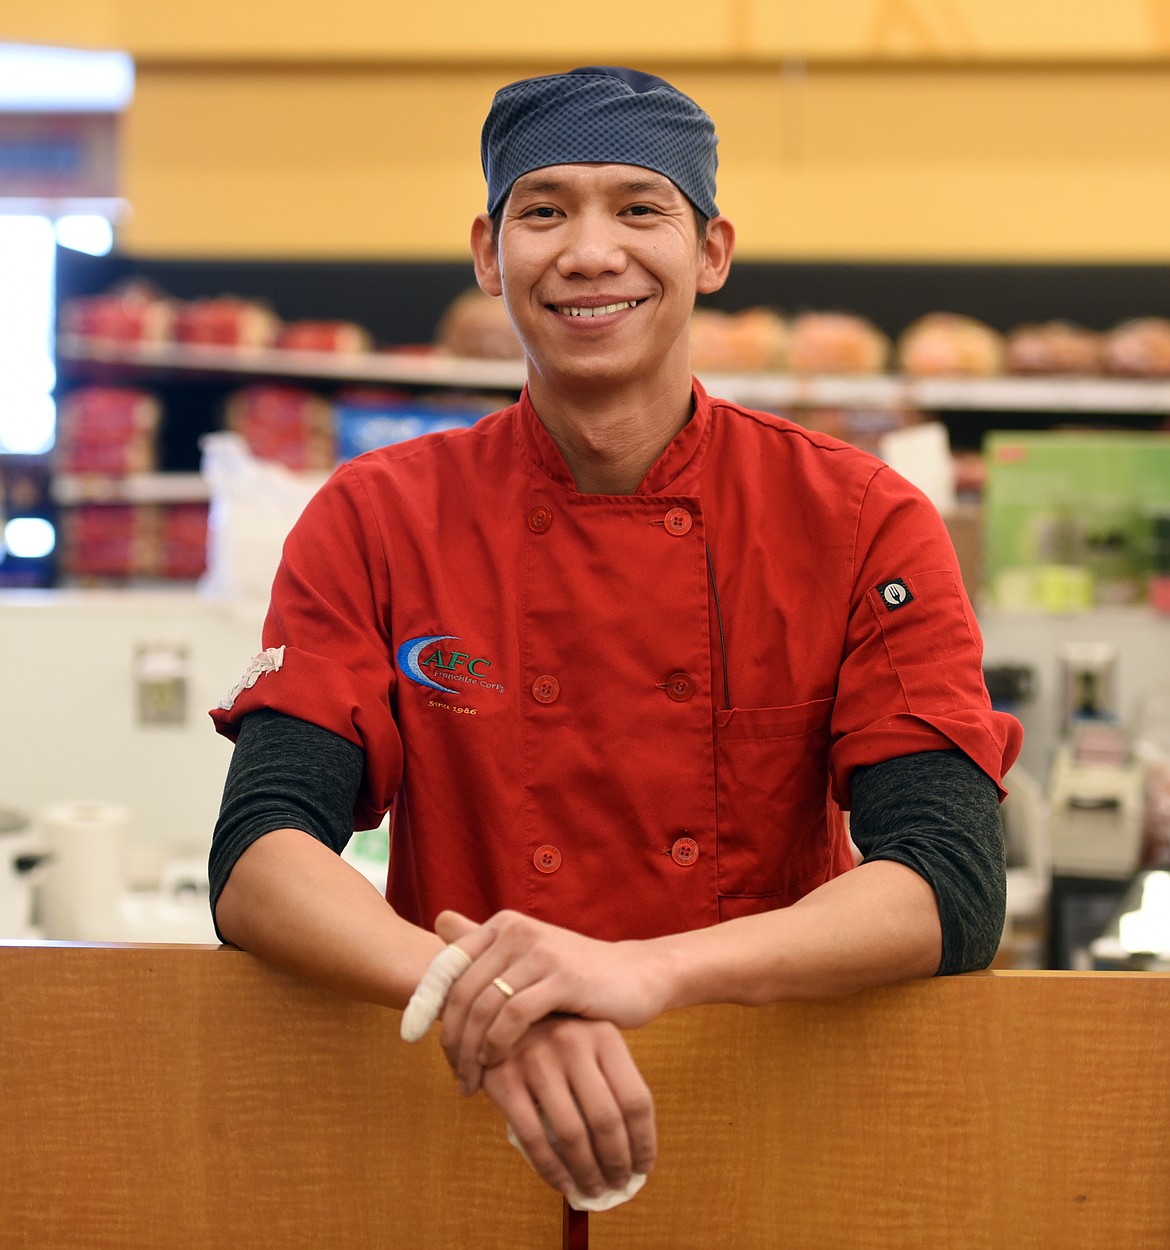 Nay Myo Thu Swe opened his popular sushi kiosk at Smith&#146;s in Kalispell in August 2015 and has created a loyal clientele for his handcrafted food. (Brenda Ahearn photos/Flathead Journal)